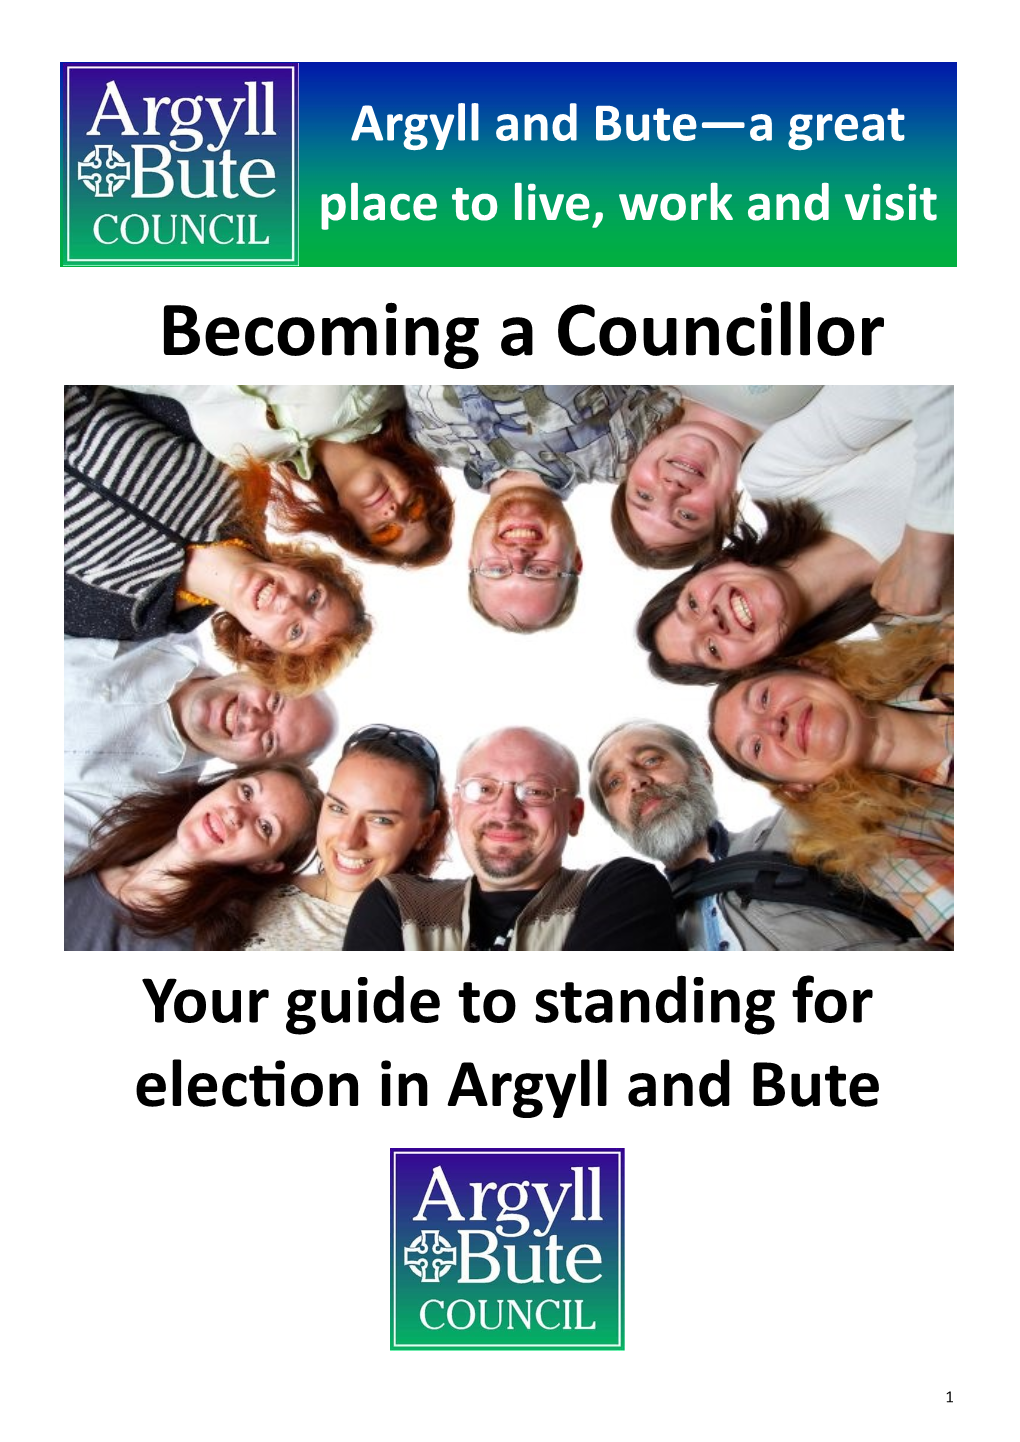 Becoming a Councillor (Argyll-Bute.Gov.Uk)